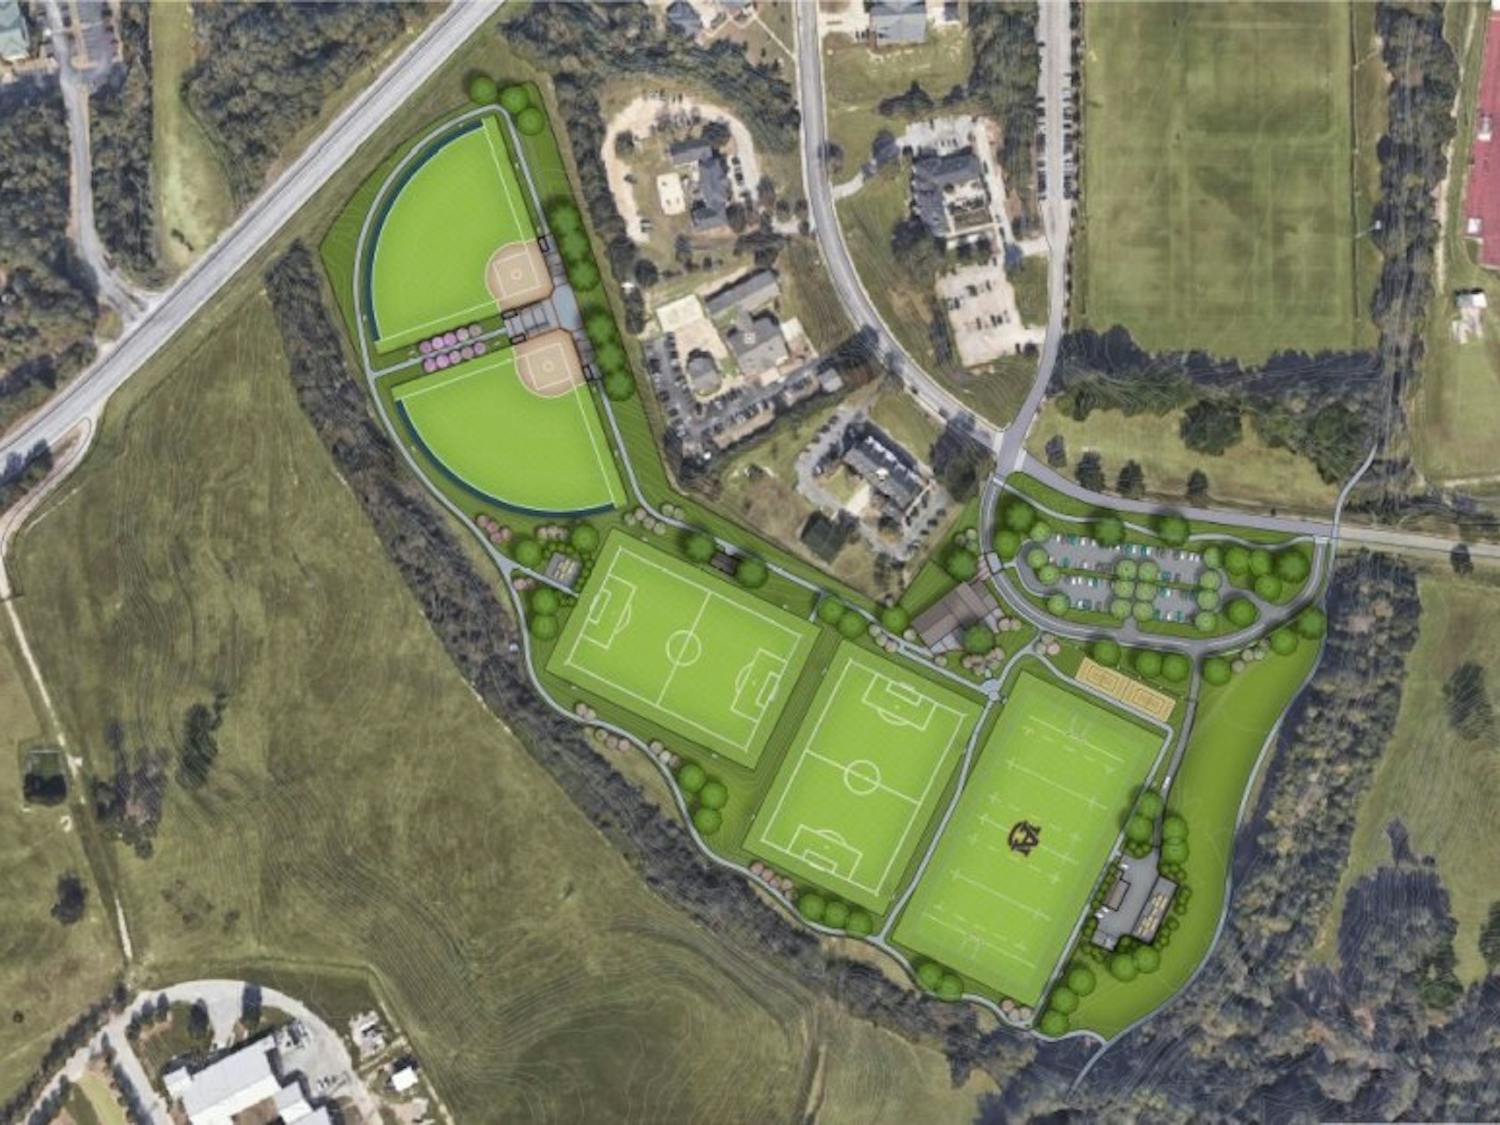 Design rendering of the site&nbsp;plan for the recreation field expansion project.&nbsp;